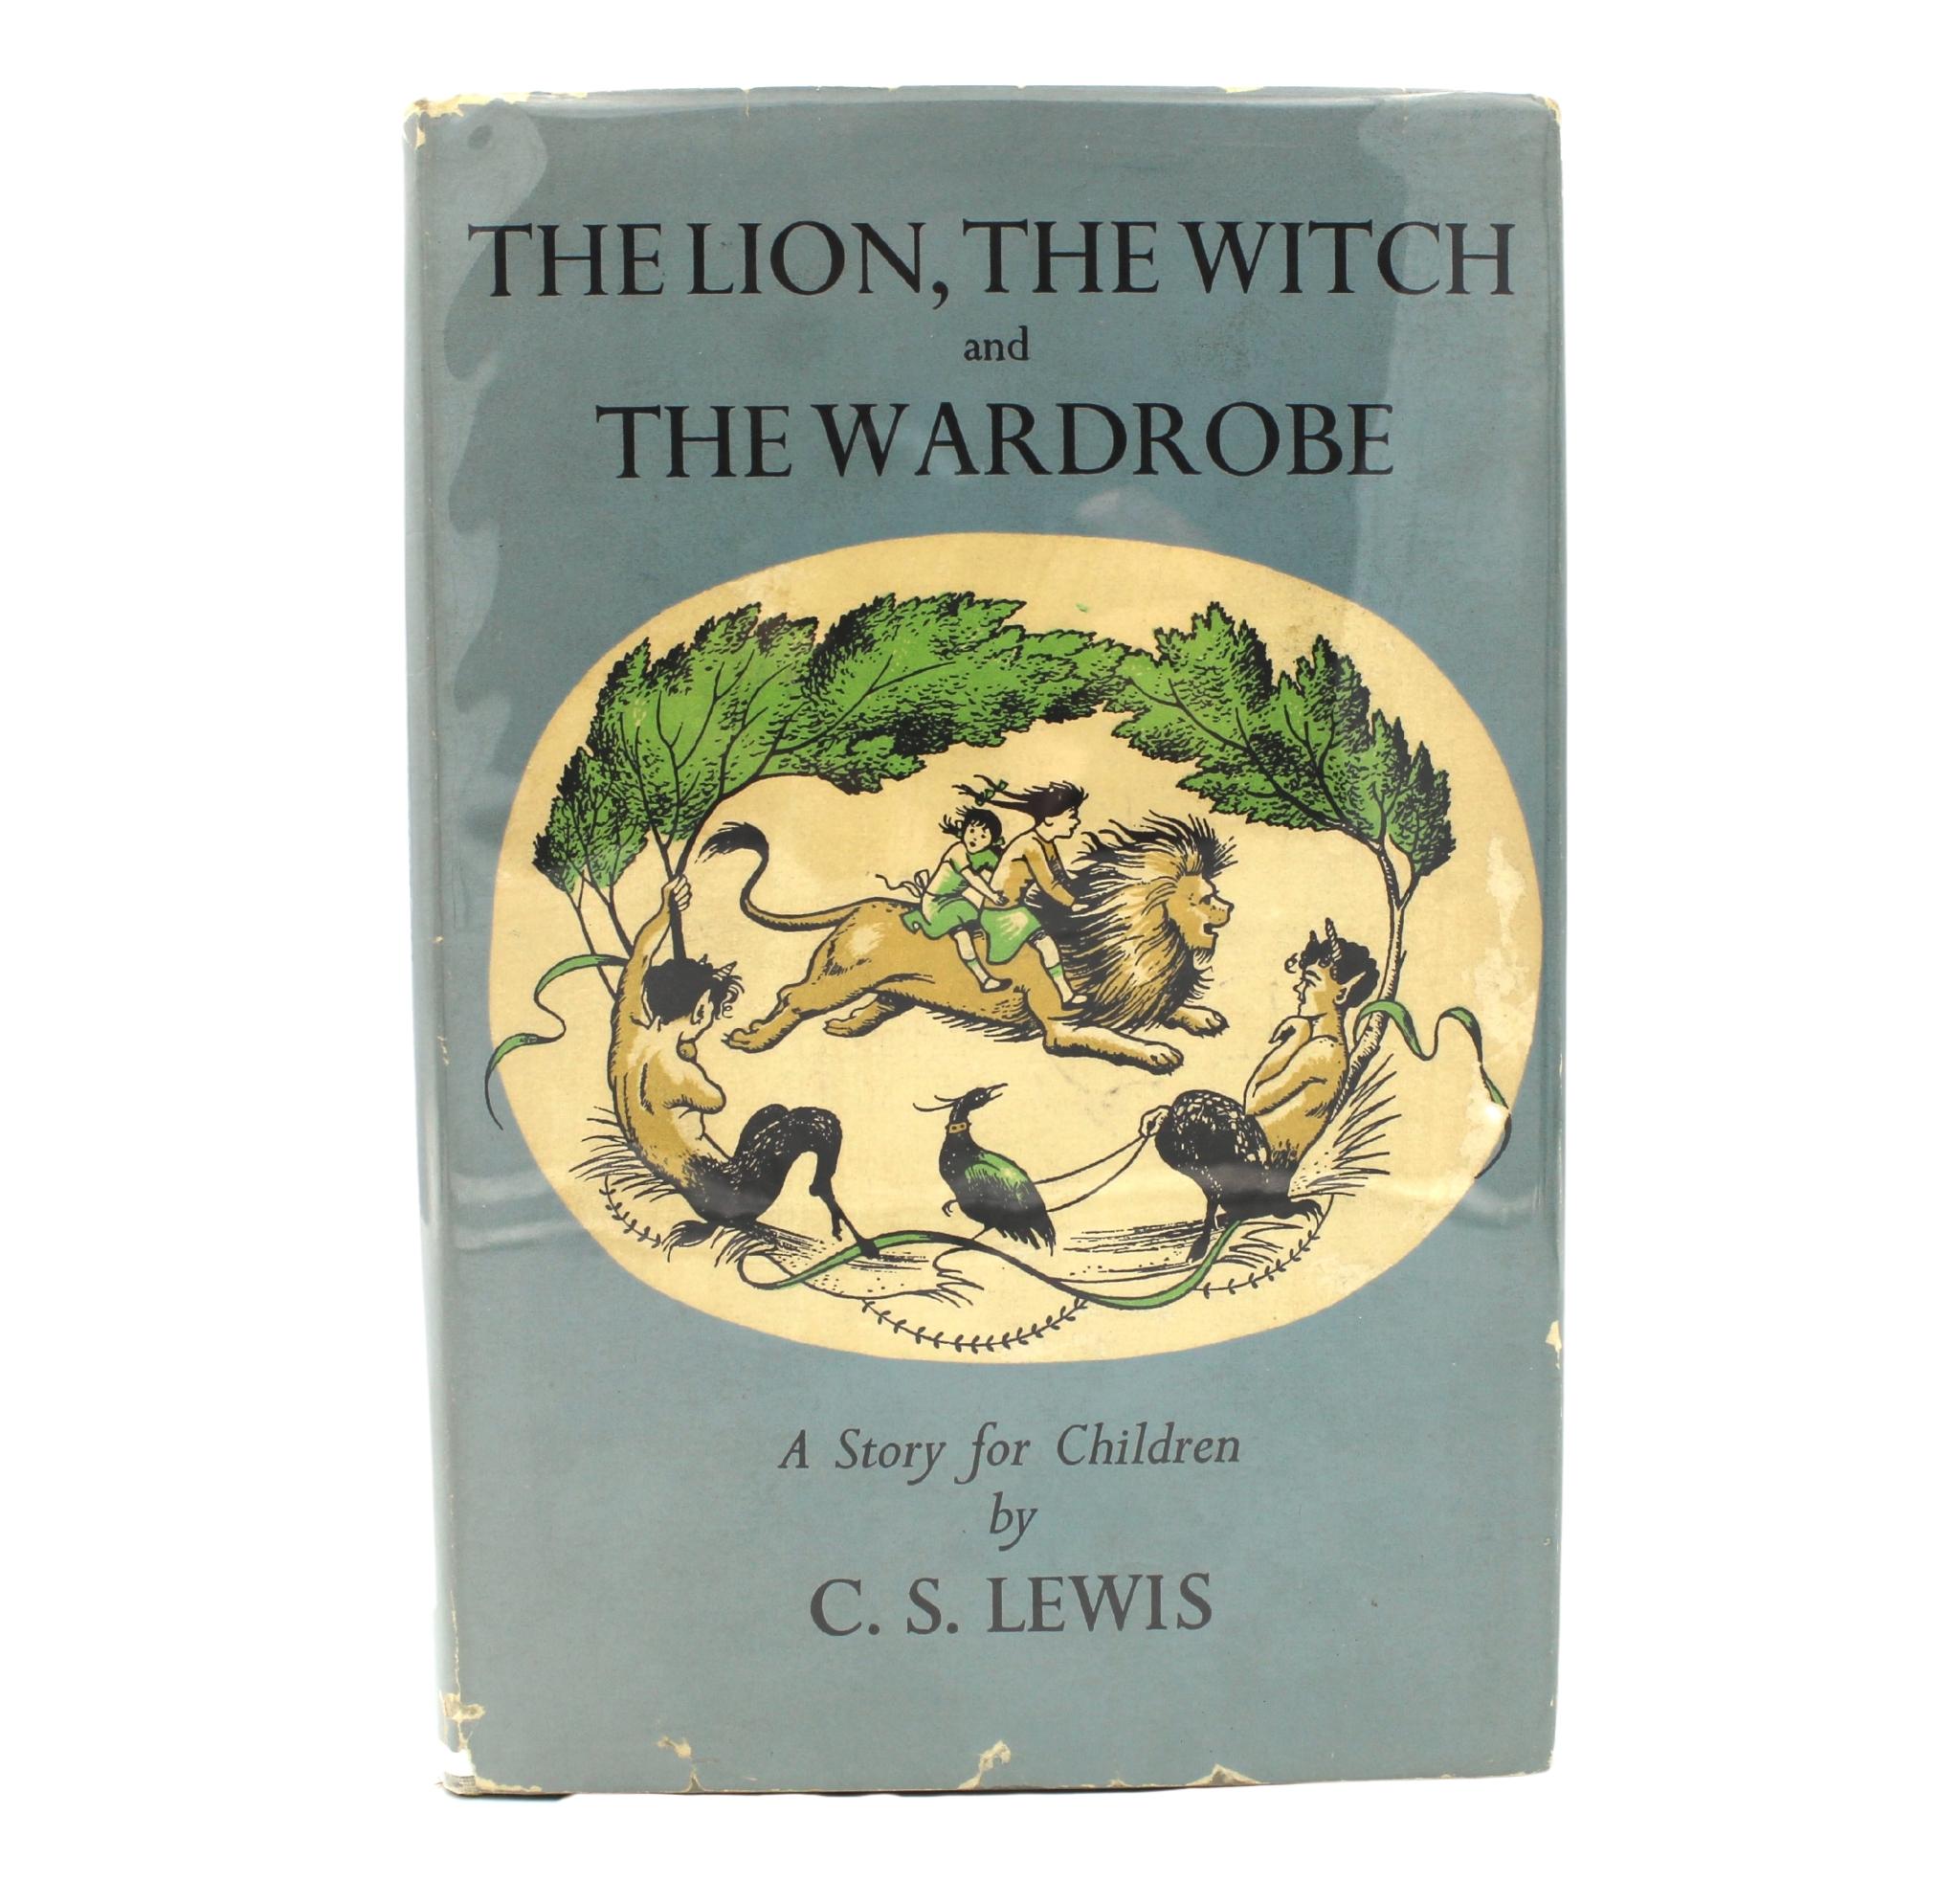 Lewis, C. S. The Lion, The Witch, and The Wardrobe. New York: The Macmillan Company, 1950. First U.S. edition. Octavo. In the original publisher's blue cloth boards and illustrated dust jacket. 

This is the first American edition of C. S. Lewis’